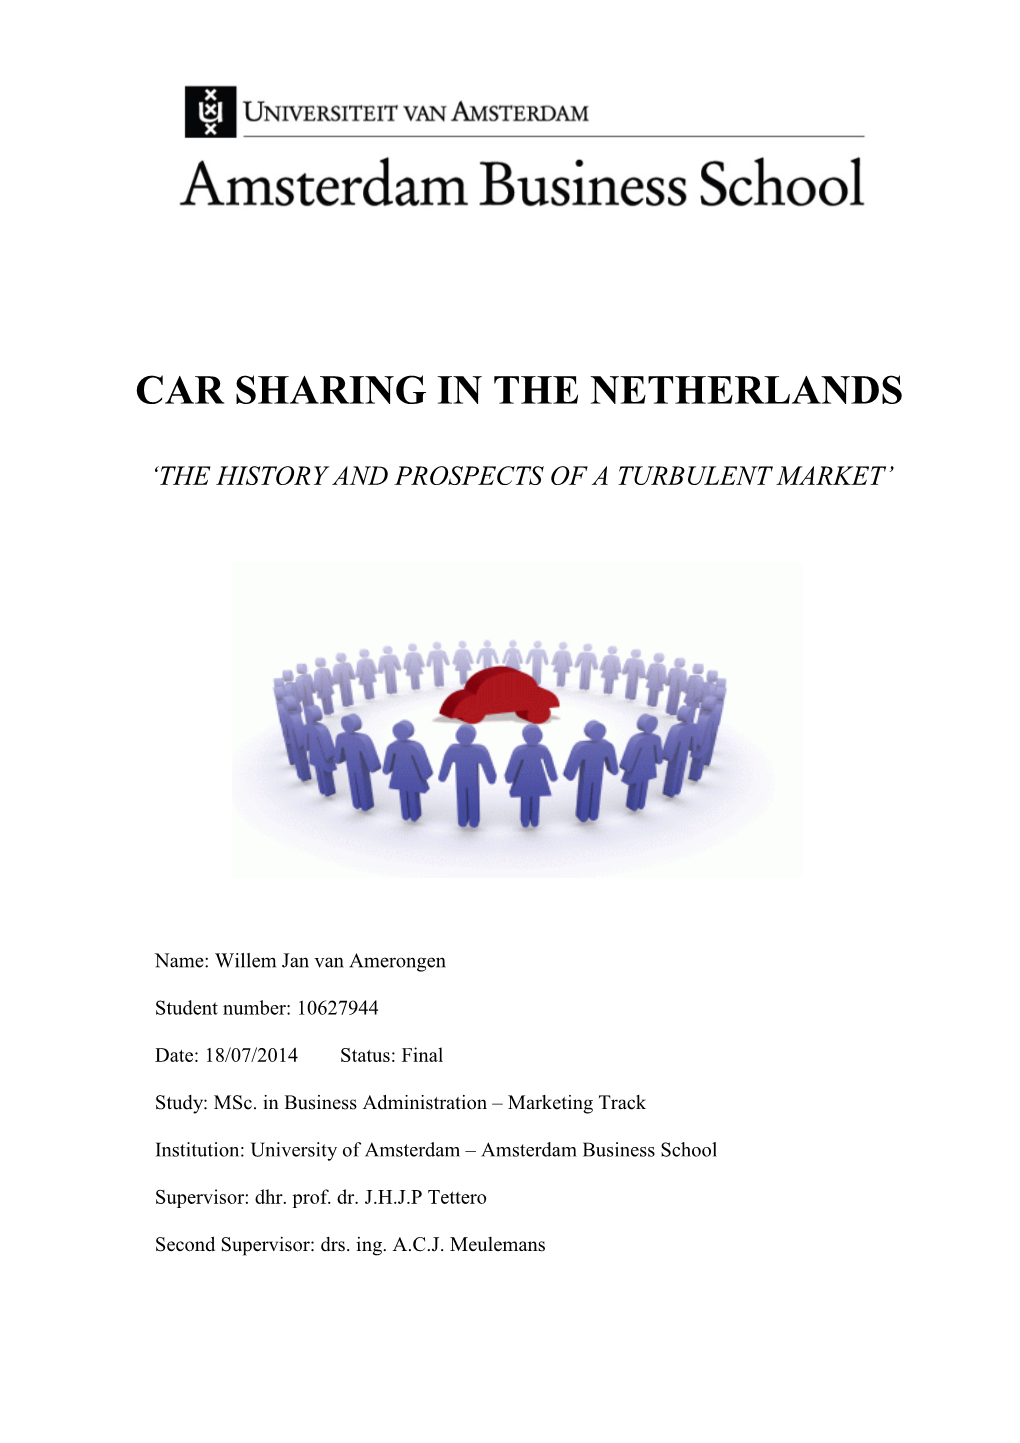 Car Sharing in the Netherlands